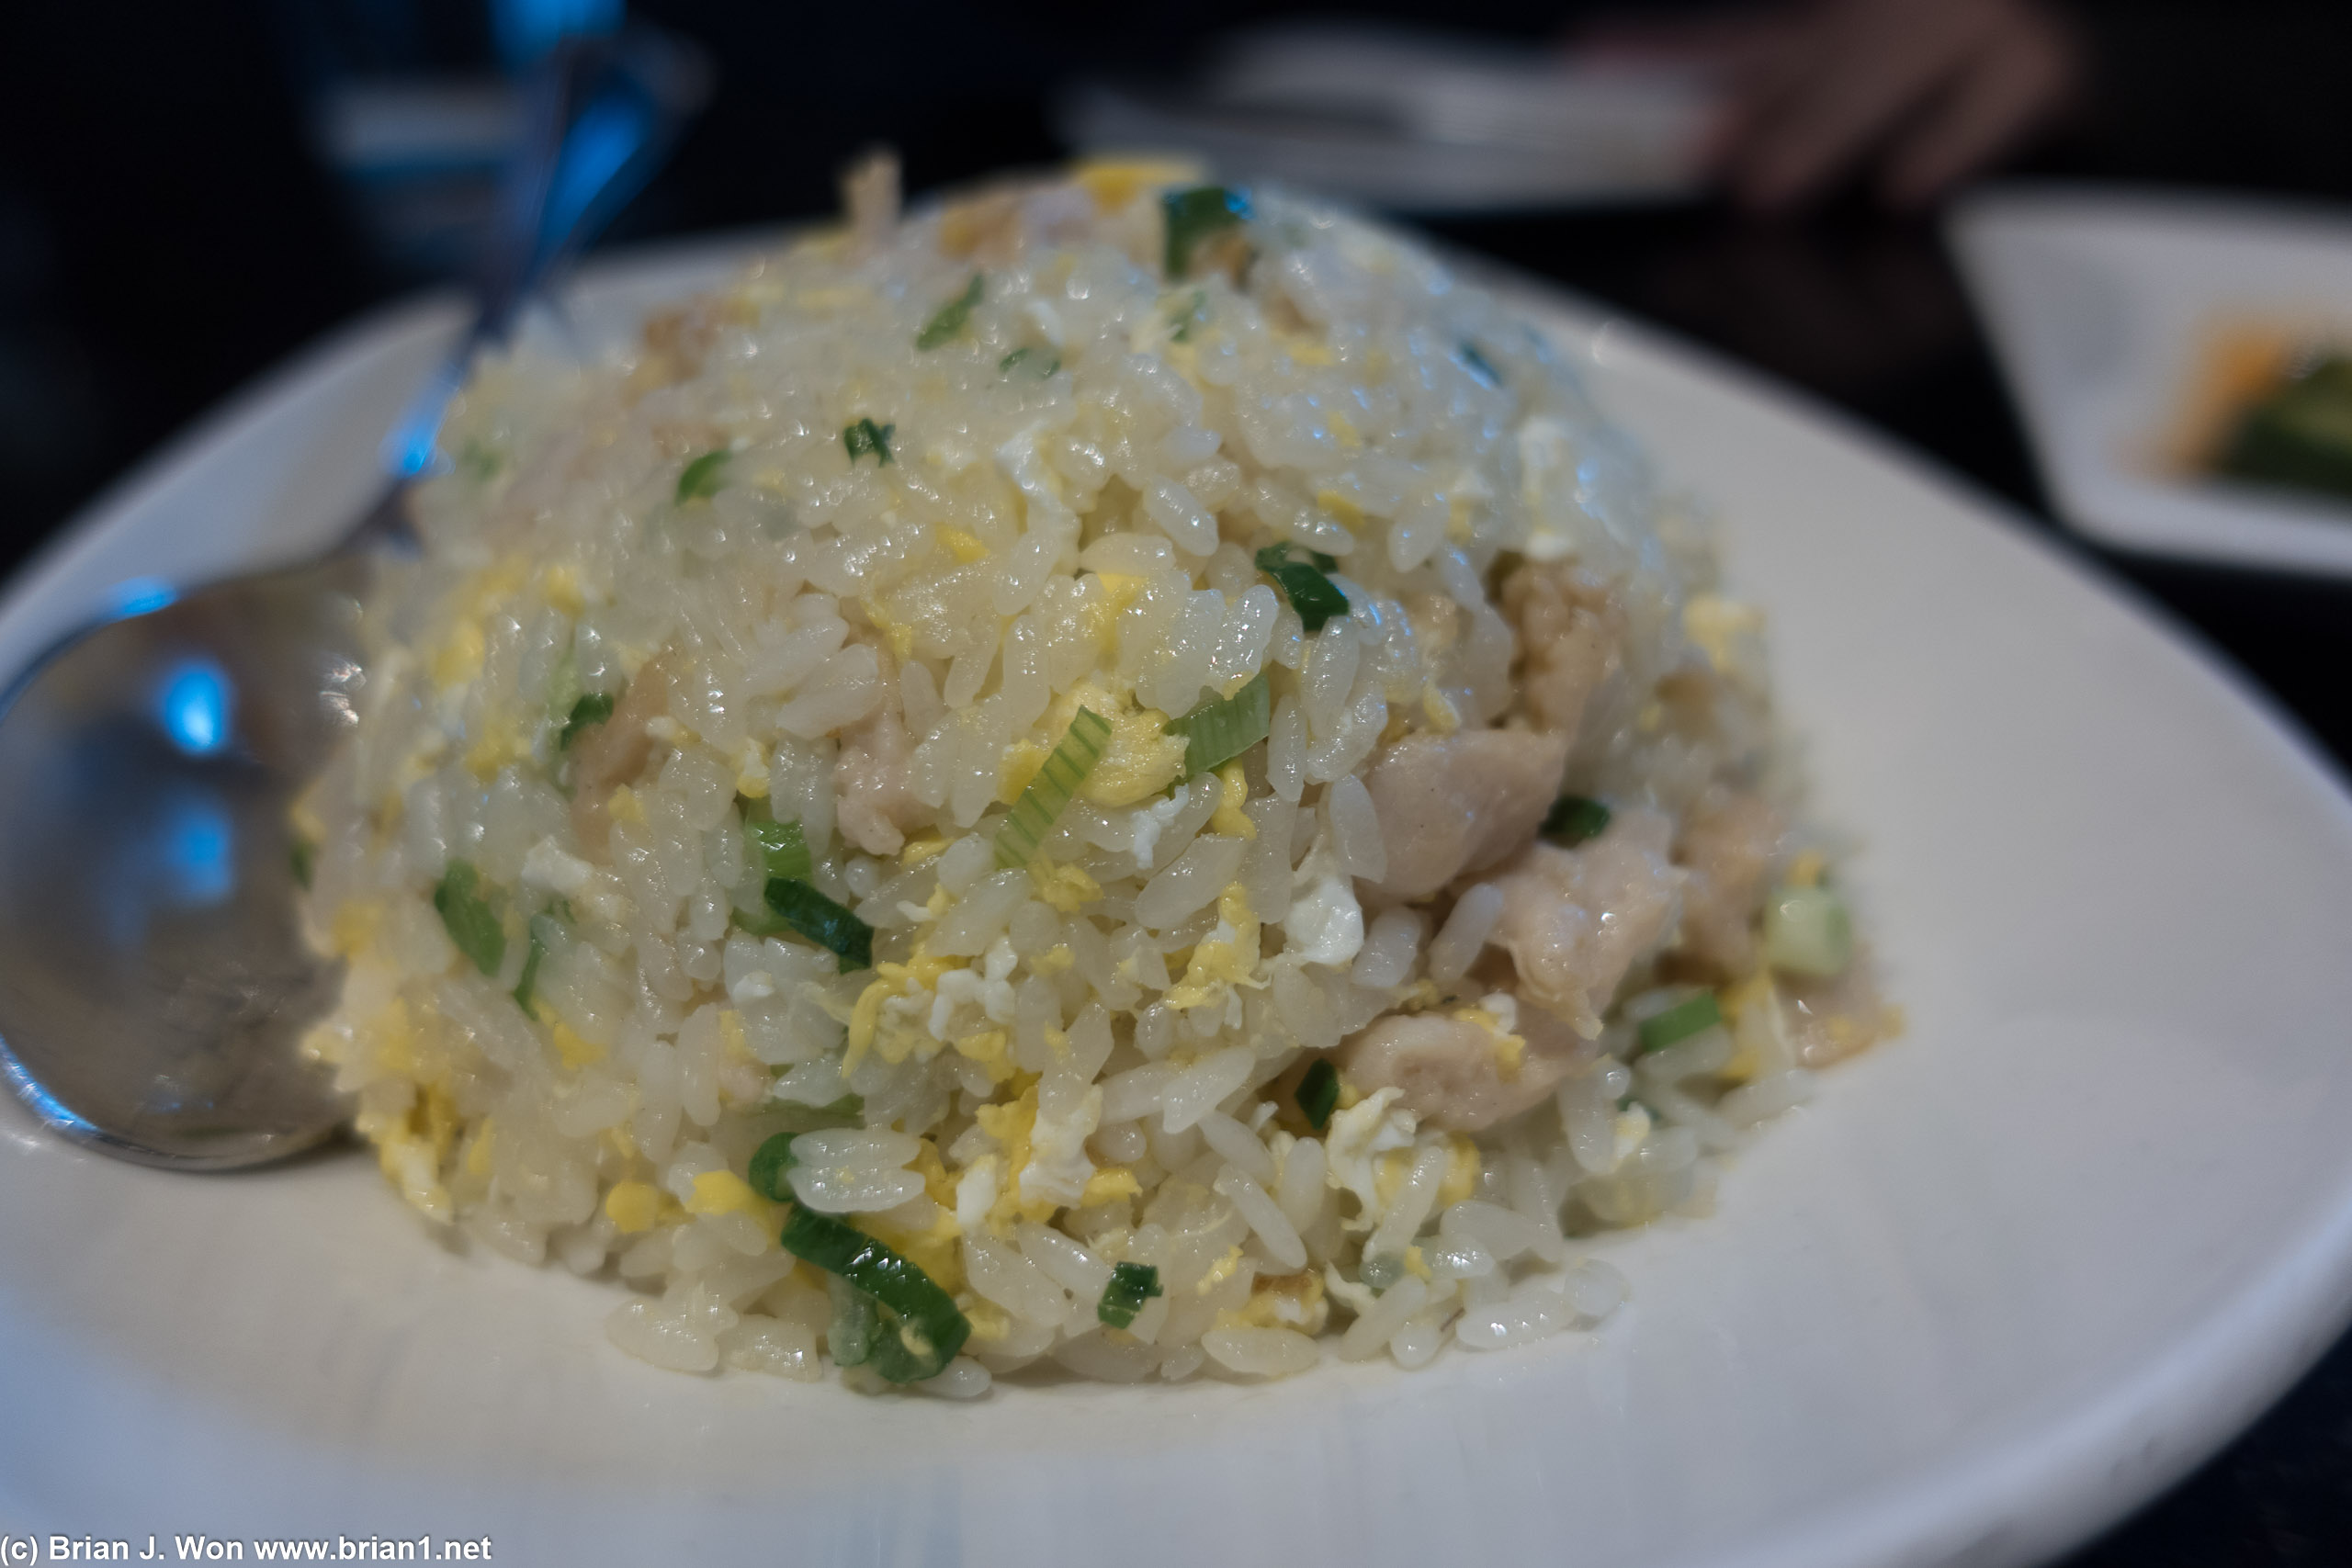 Their fried rice is always so light and fluffy, too.